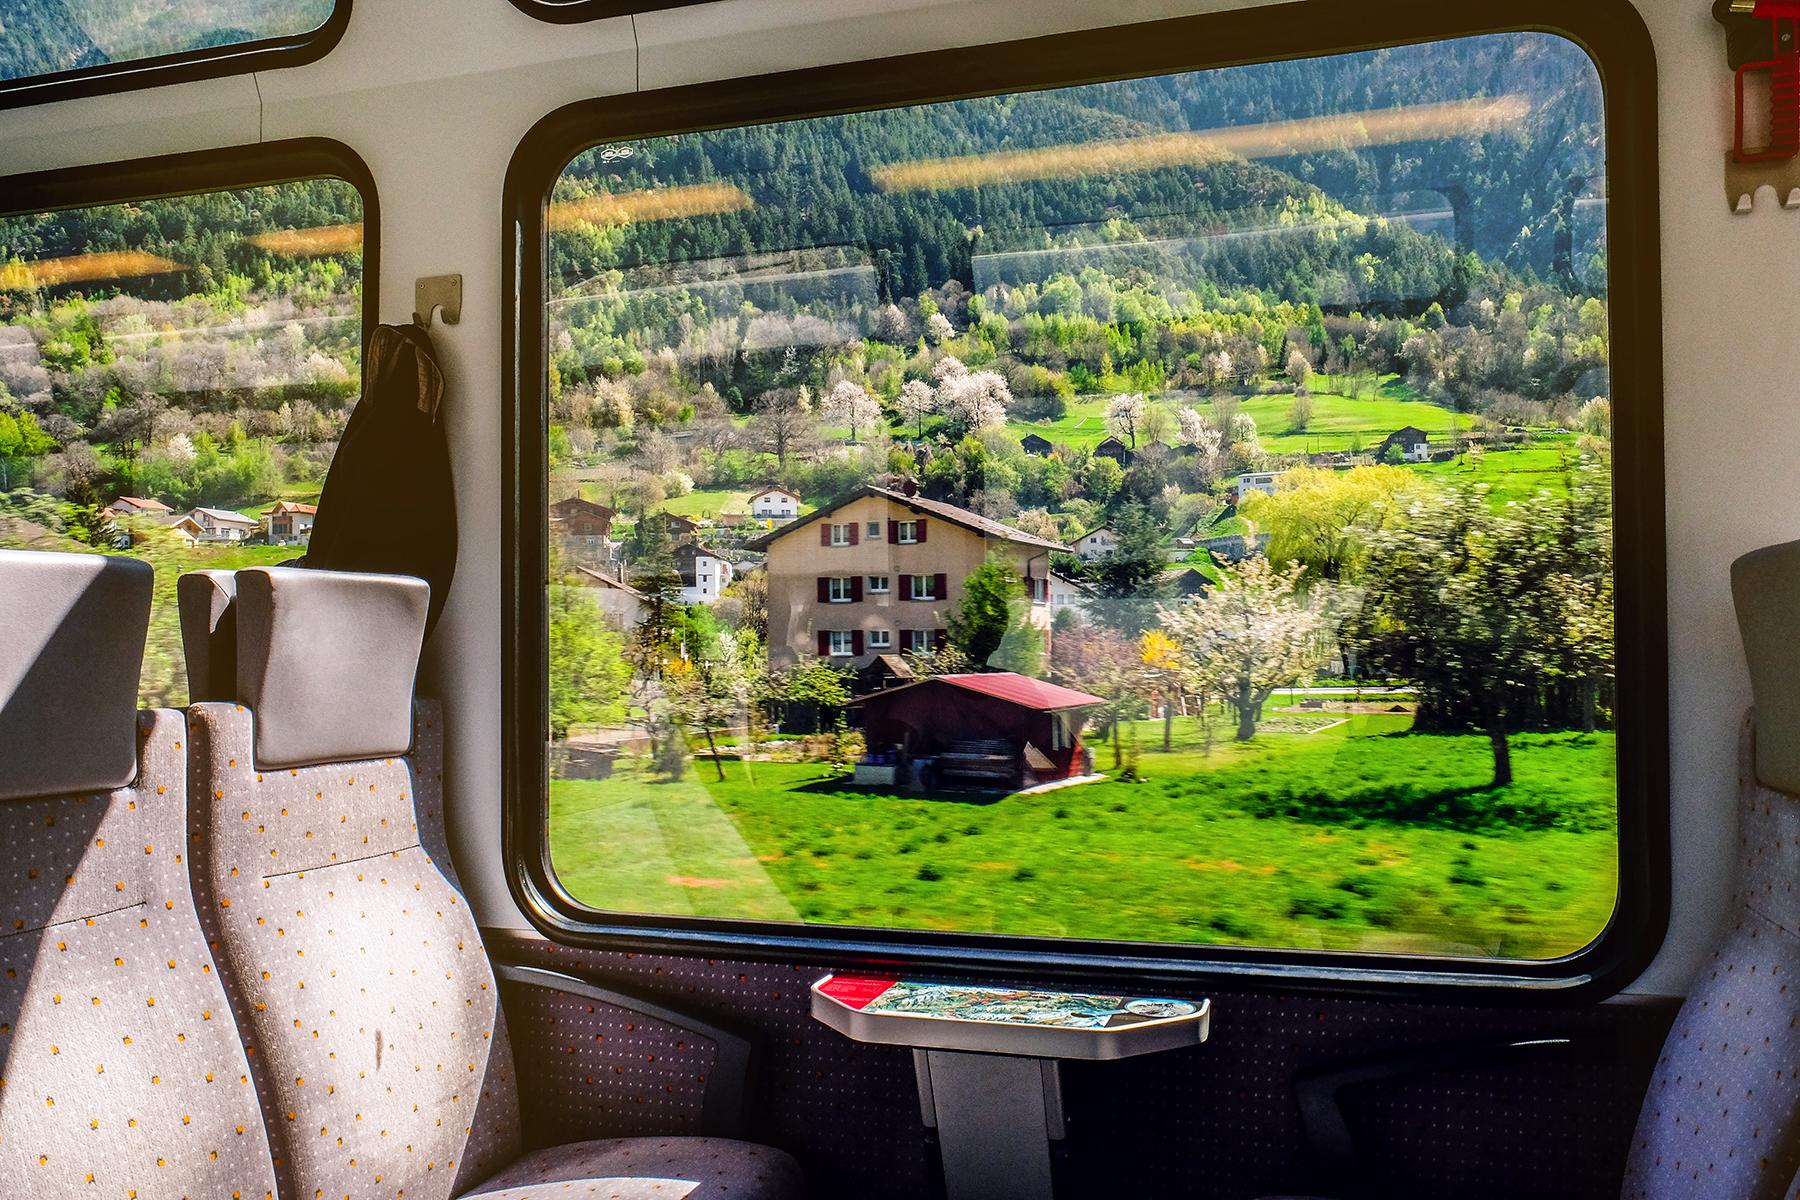 Why You Should Ride the Train Instead of Flying